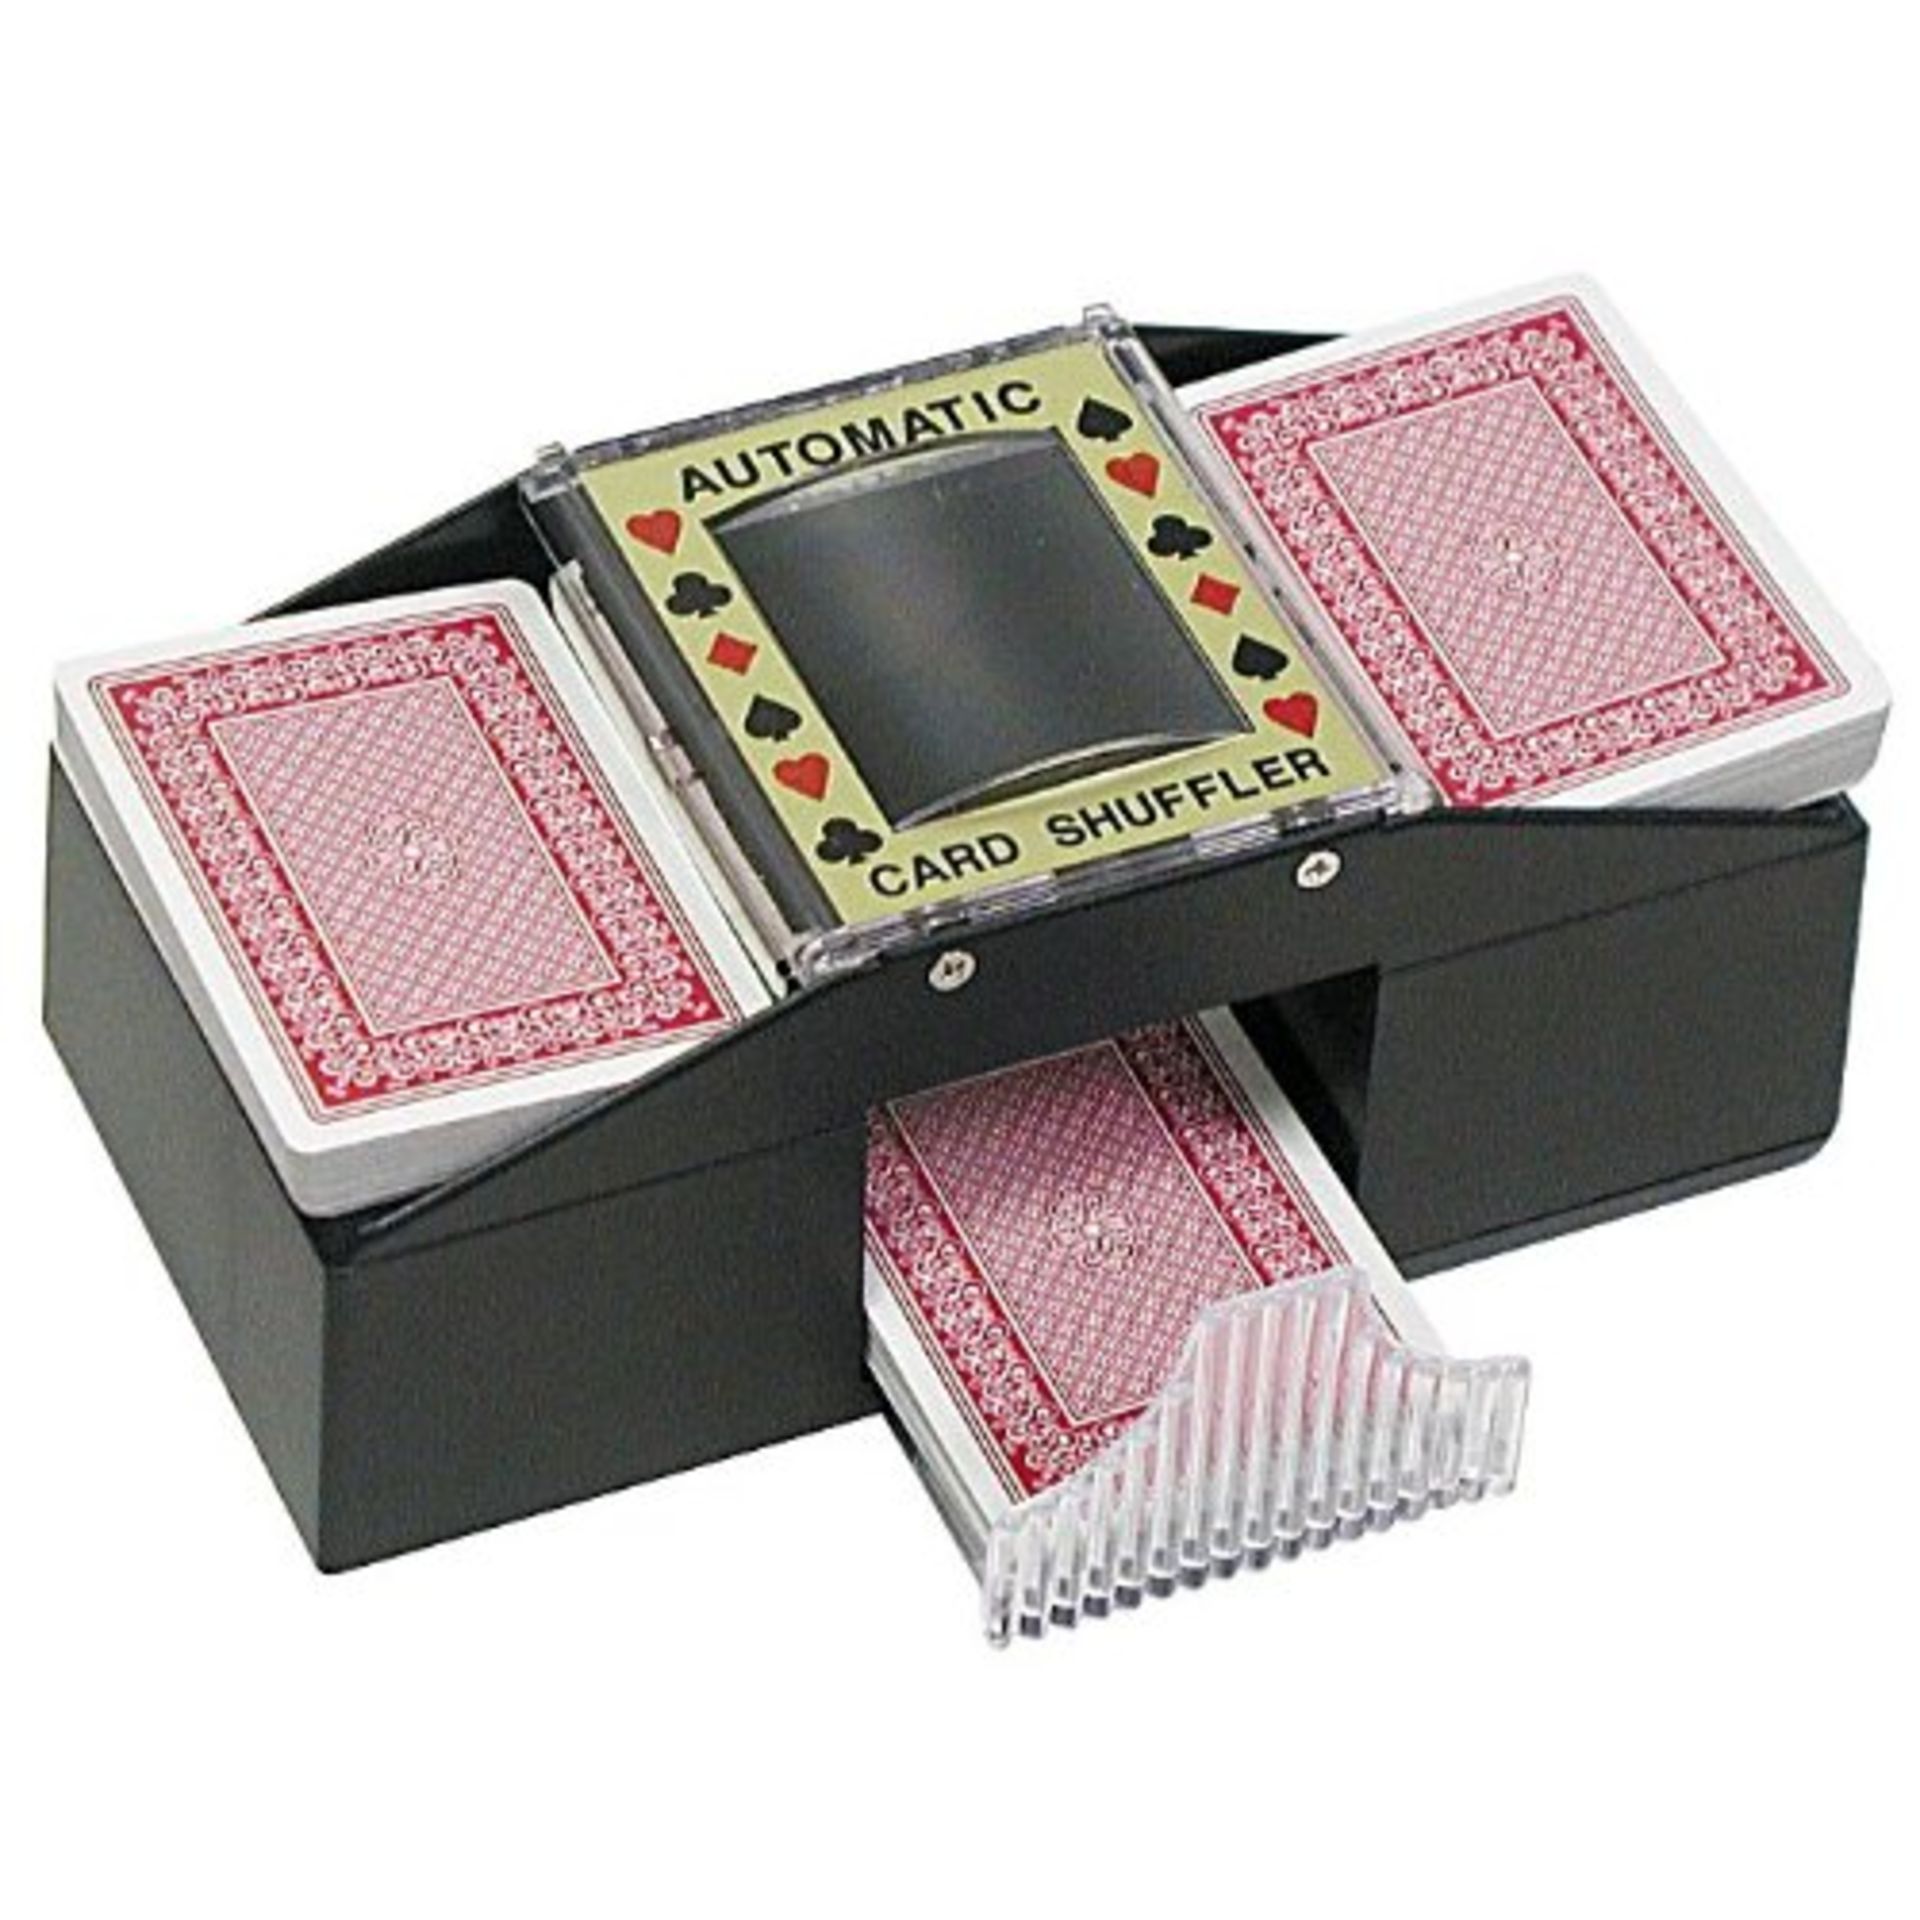 V *TRADE QTY* Brand New Automatic Card Shuffler - Operates on 2 x C Batteries (Not Included) -